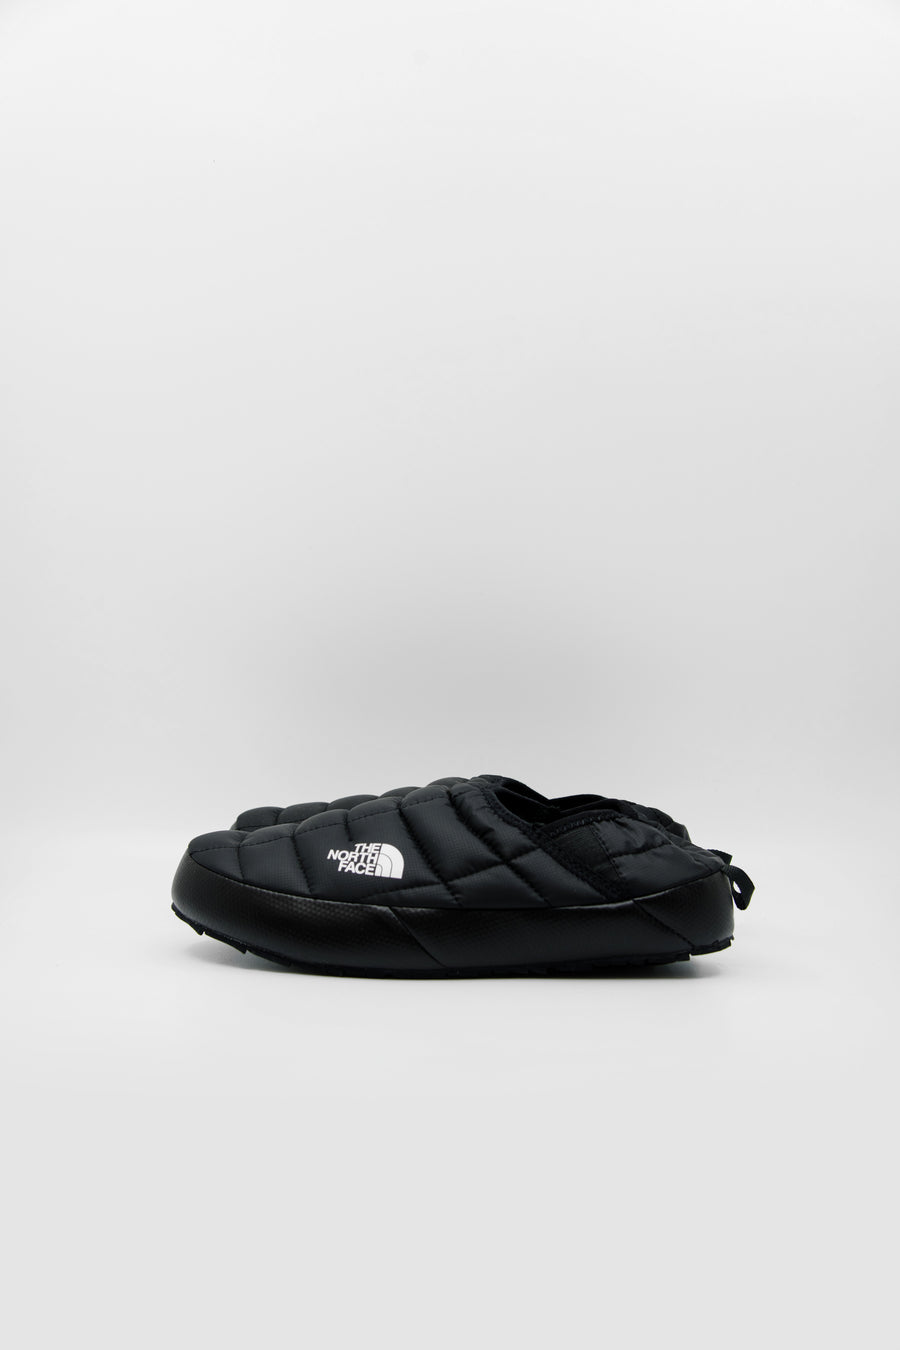 ThermoBall Traction Mule V Black